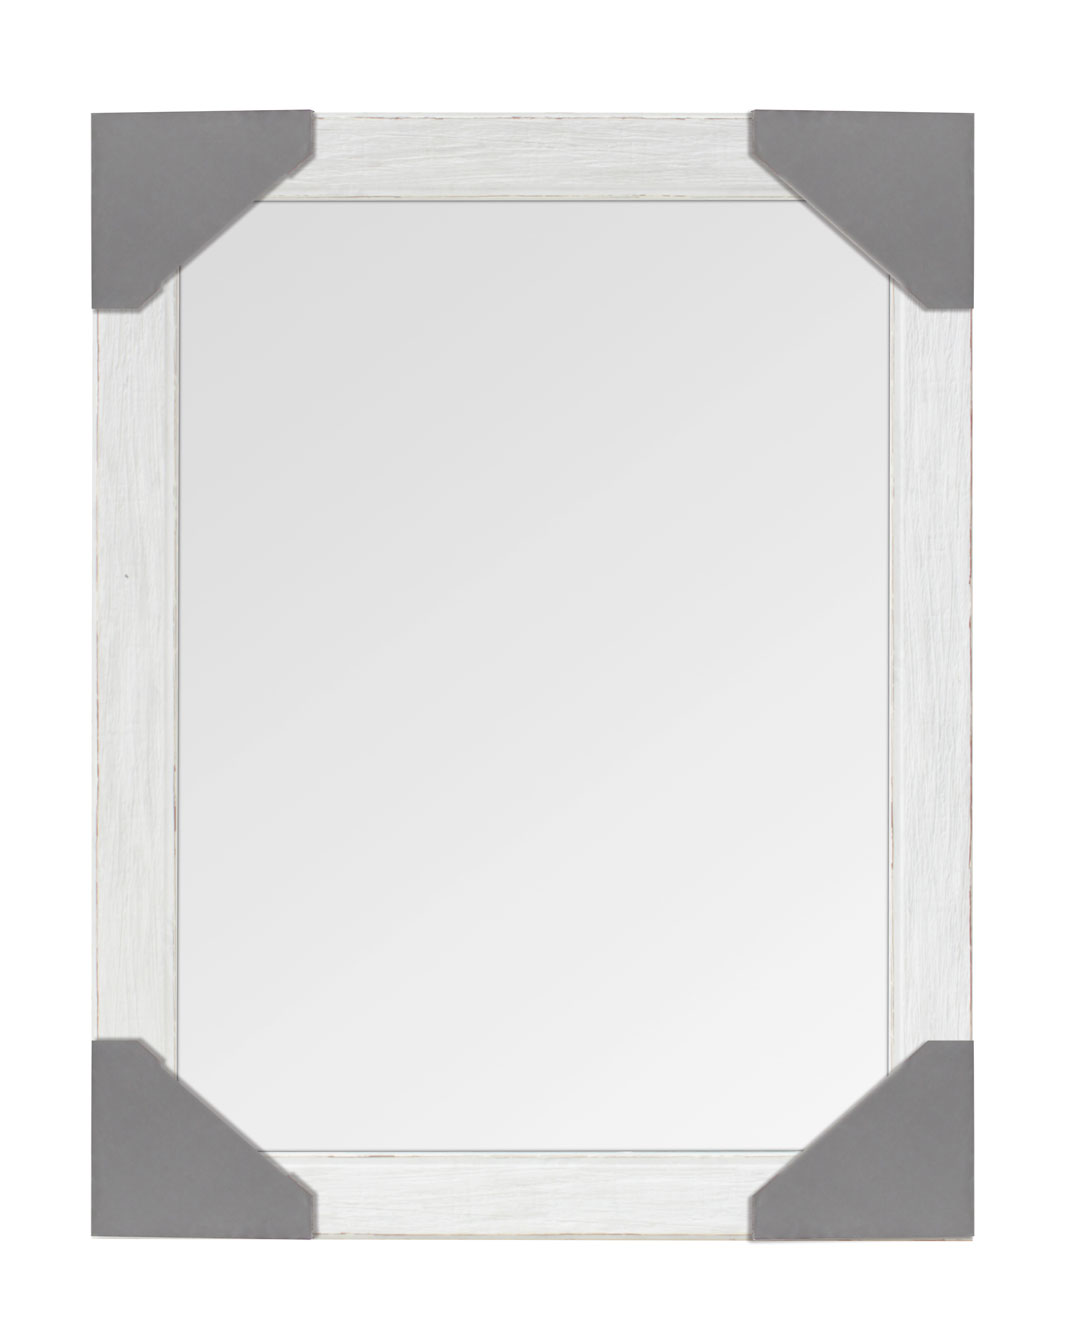 SUPERLIVING WALL MIRROR 40X50CM ASSORTED COLORS